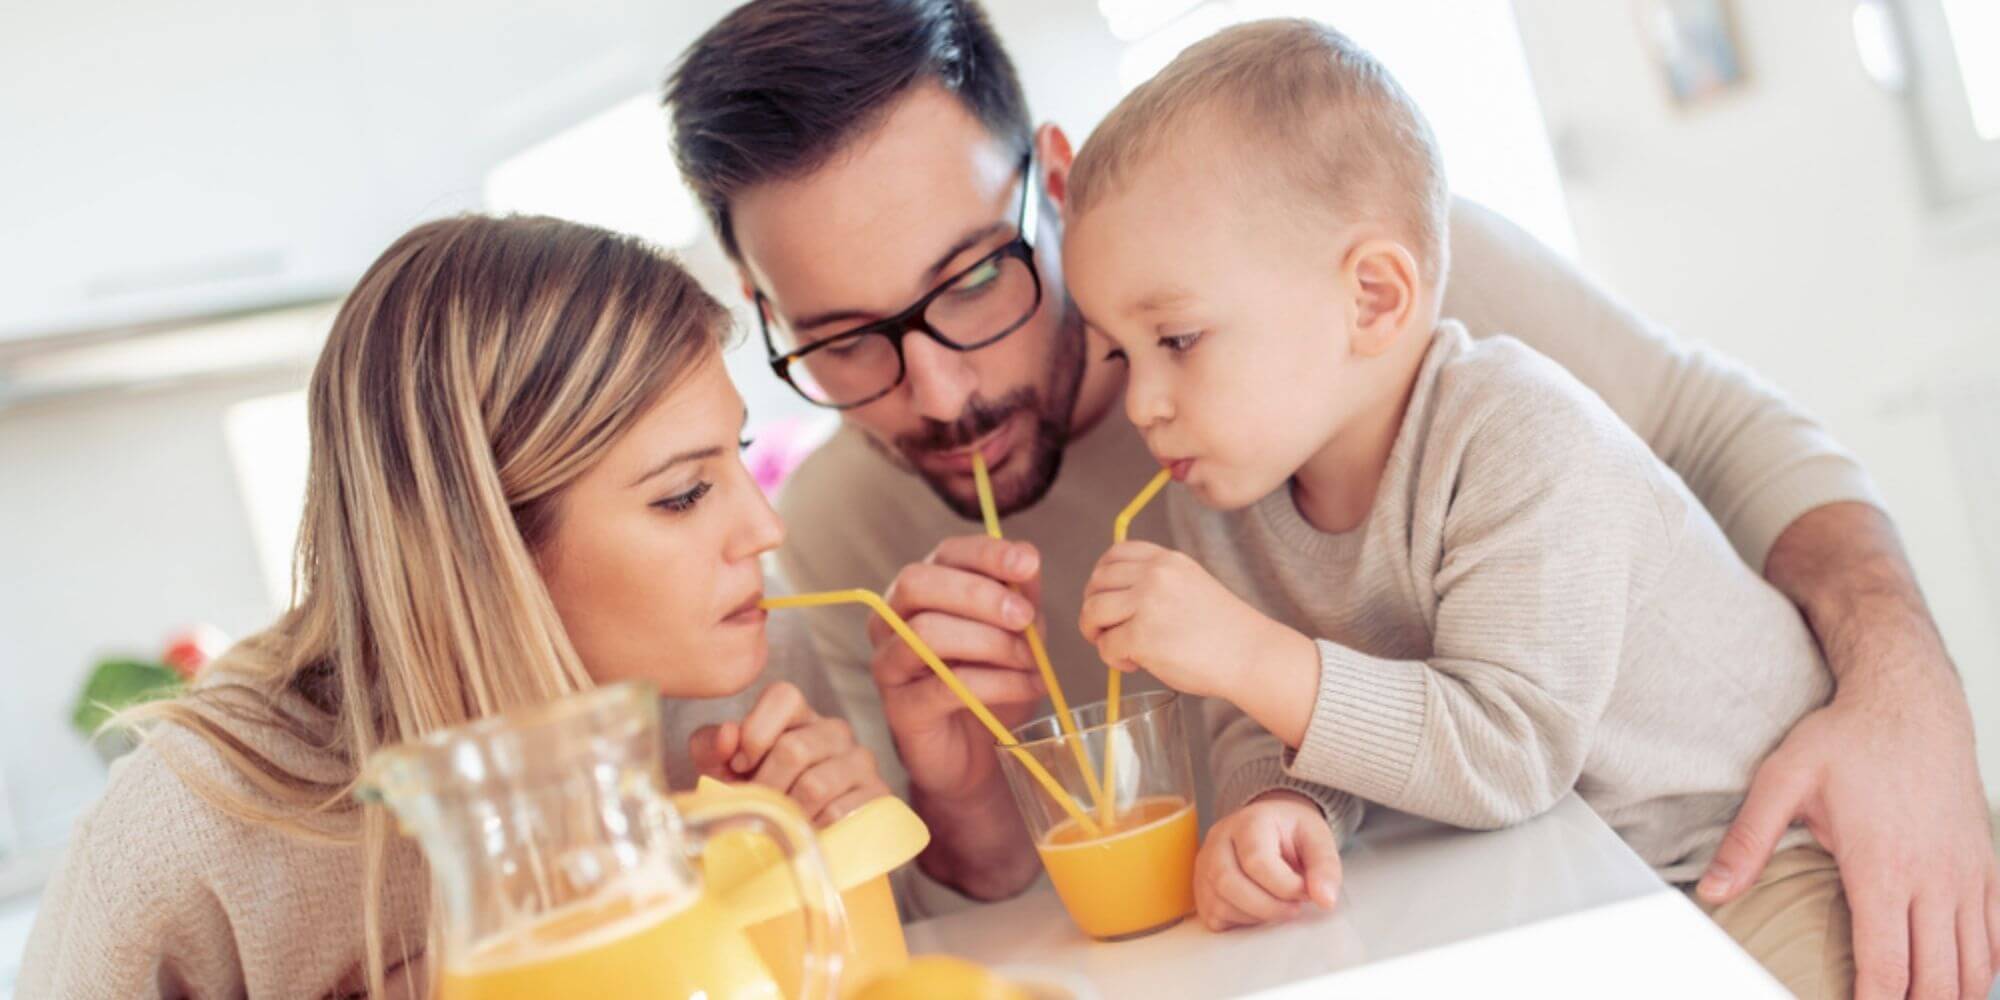 A mother, father, and son drinking homemade orange juice from straws in the same cup.